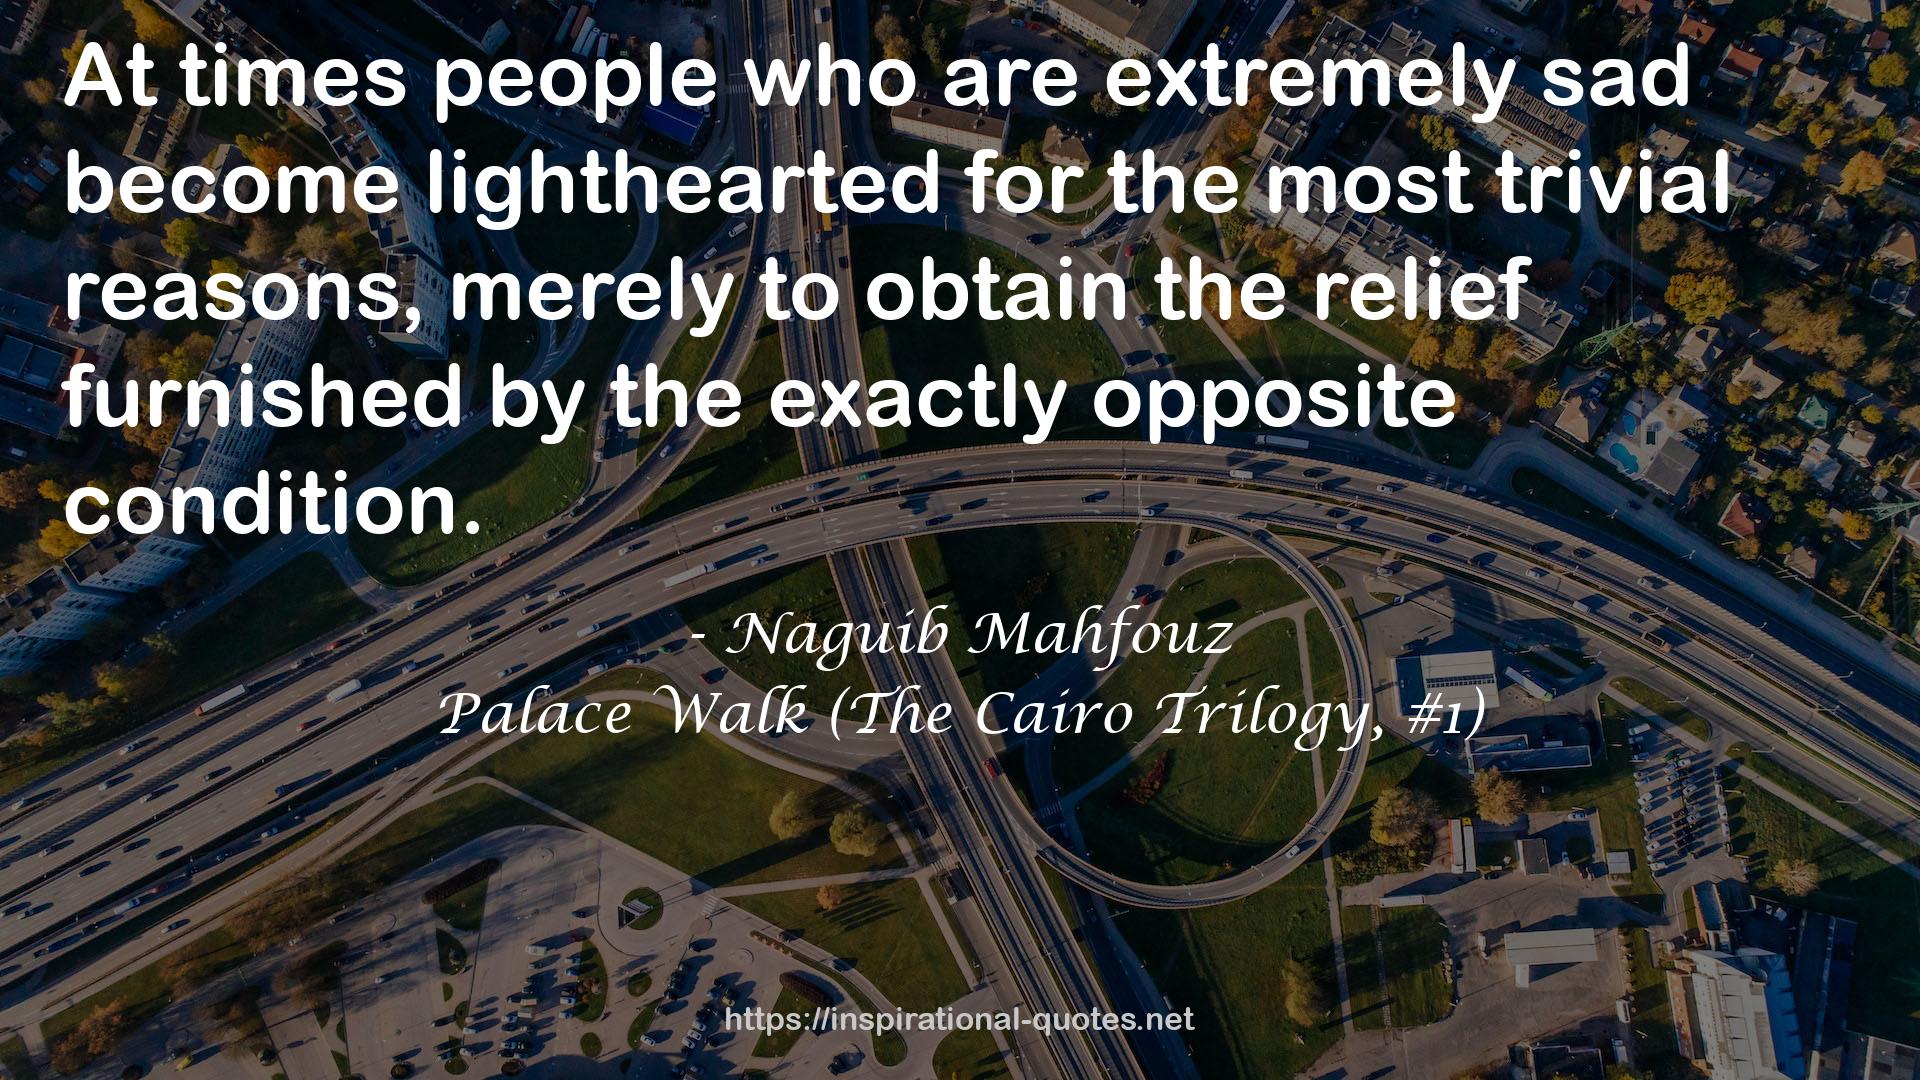 Palace Walk (The Cairo Trilogy, #1) QUOTES